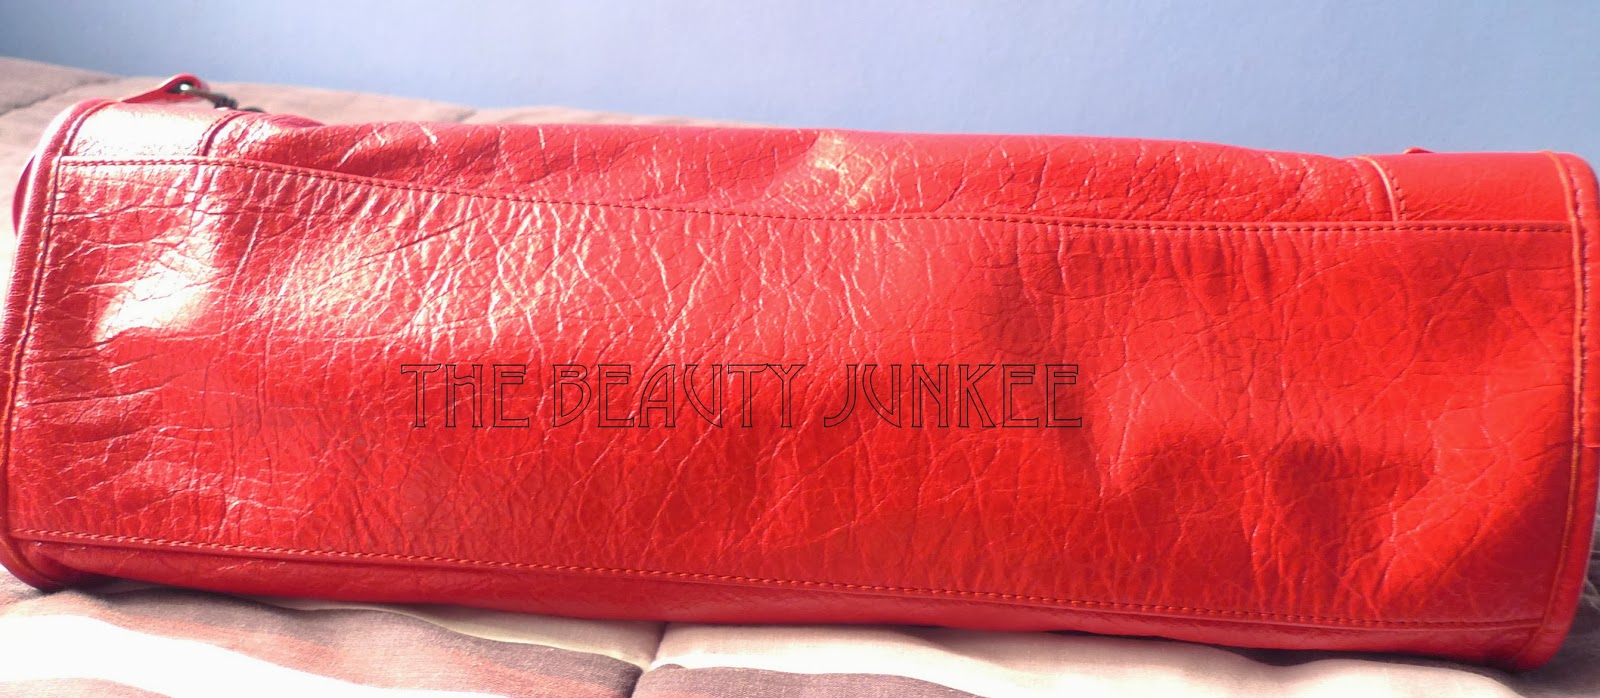 Balenciaga - Authenticated City Handbag - Leather Red Plain for Women, Very Good Condition